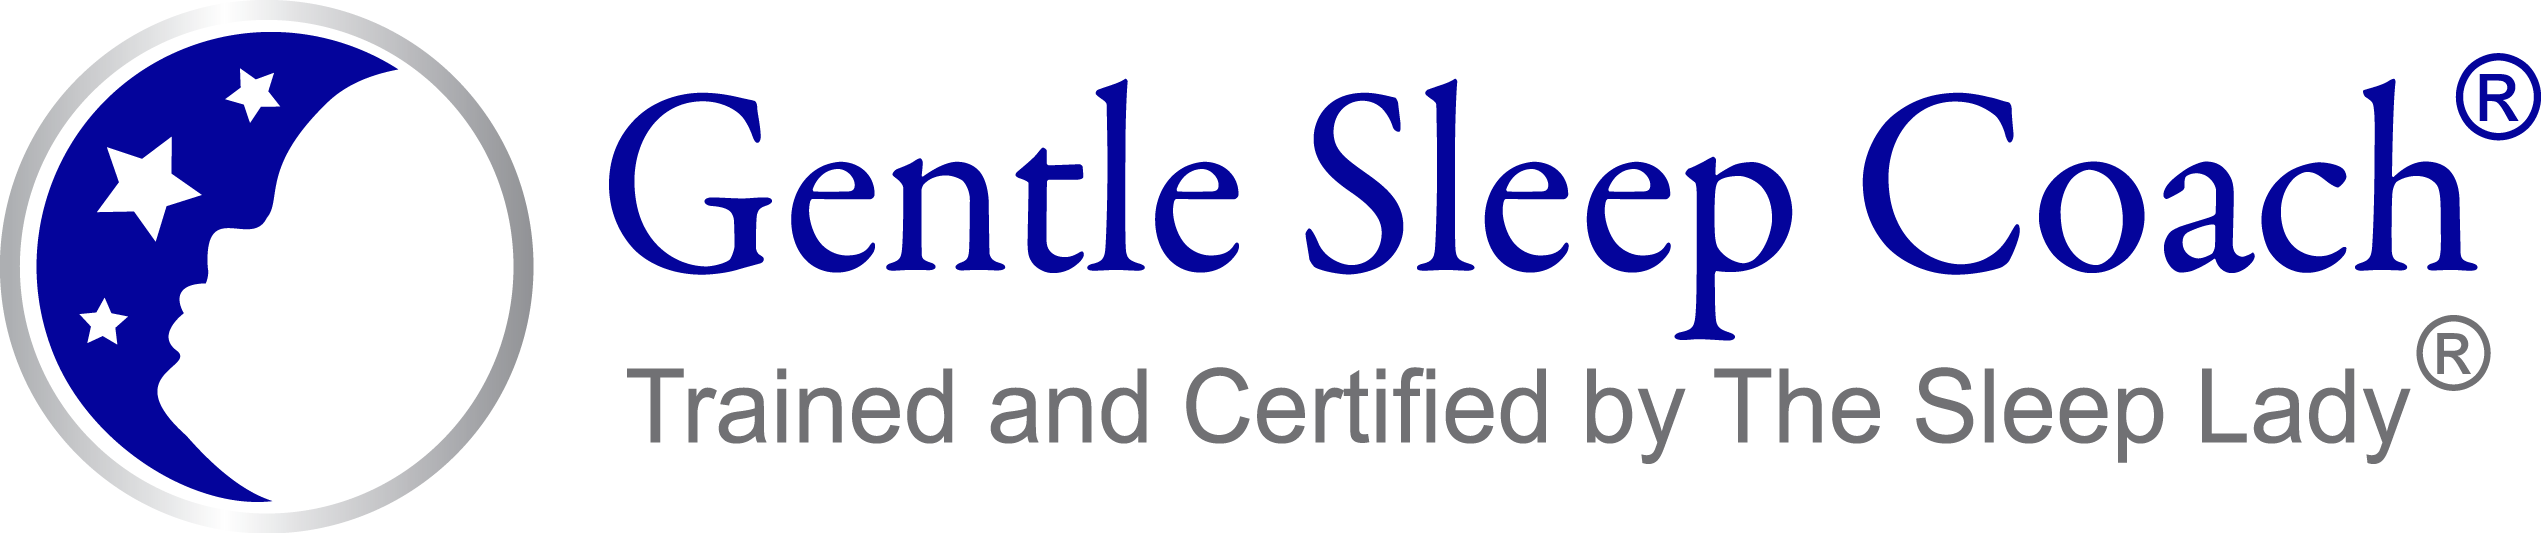 GSC logo png - How long should baby be awake?